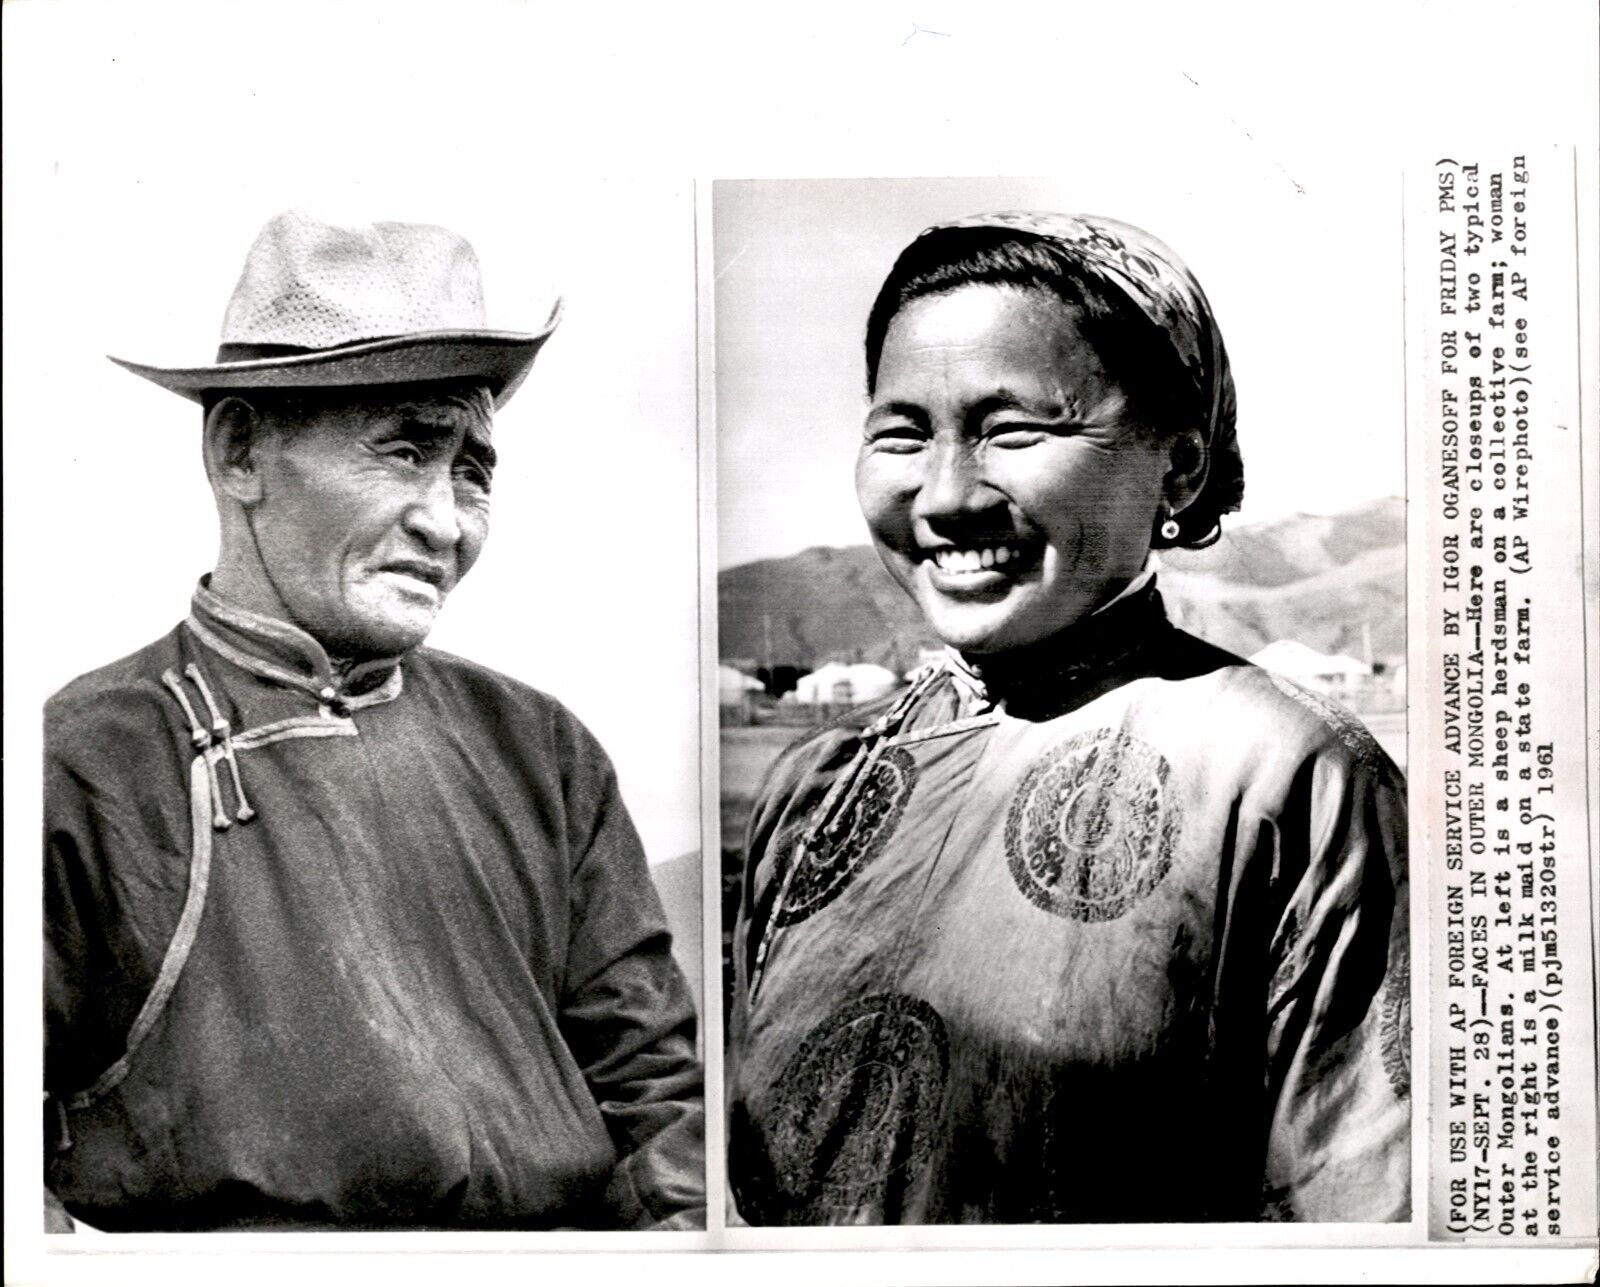 LG51 1961 AP Wire Photo FACES IN OUTER MONGOLIA SHEEP HERDSMAN & FARM MILK MAID